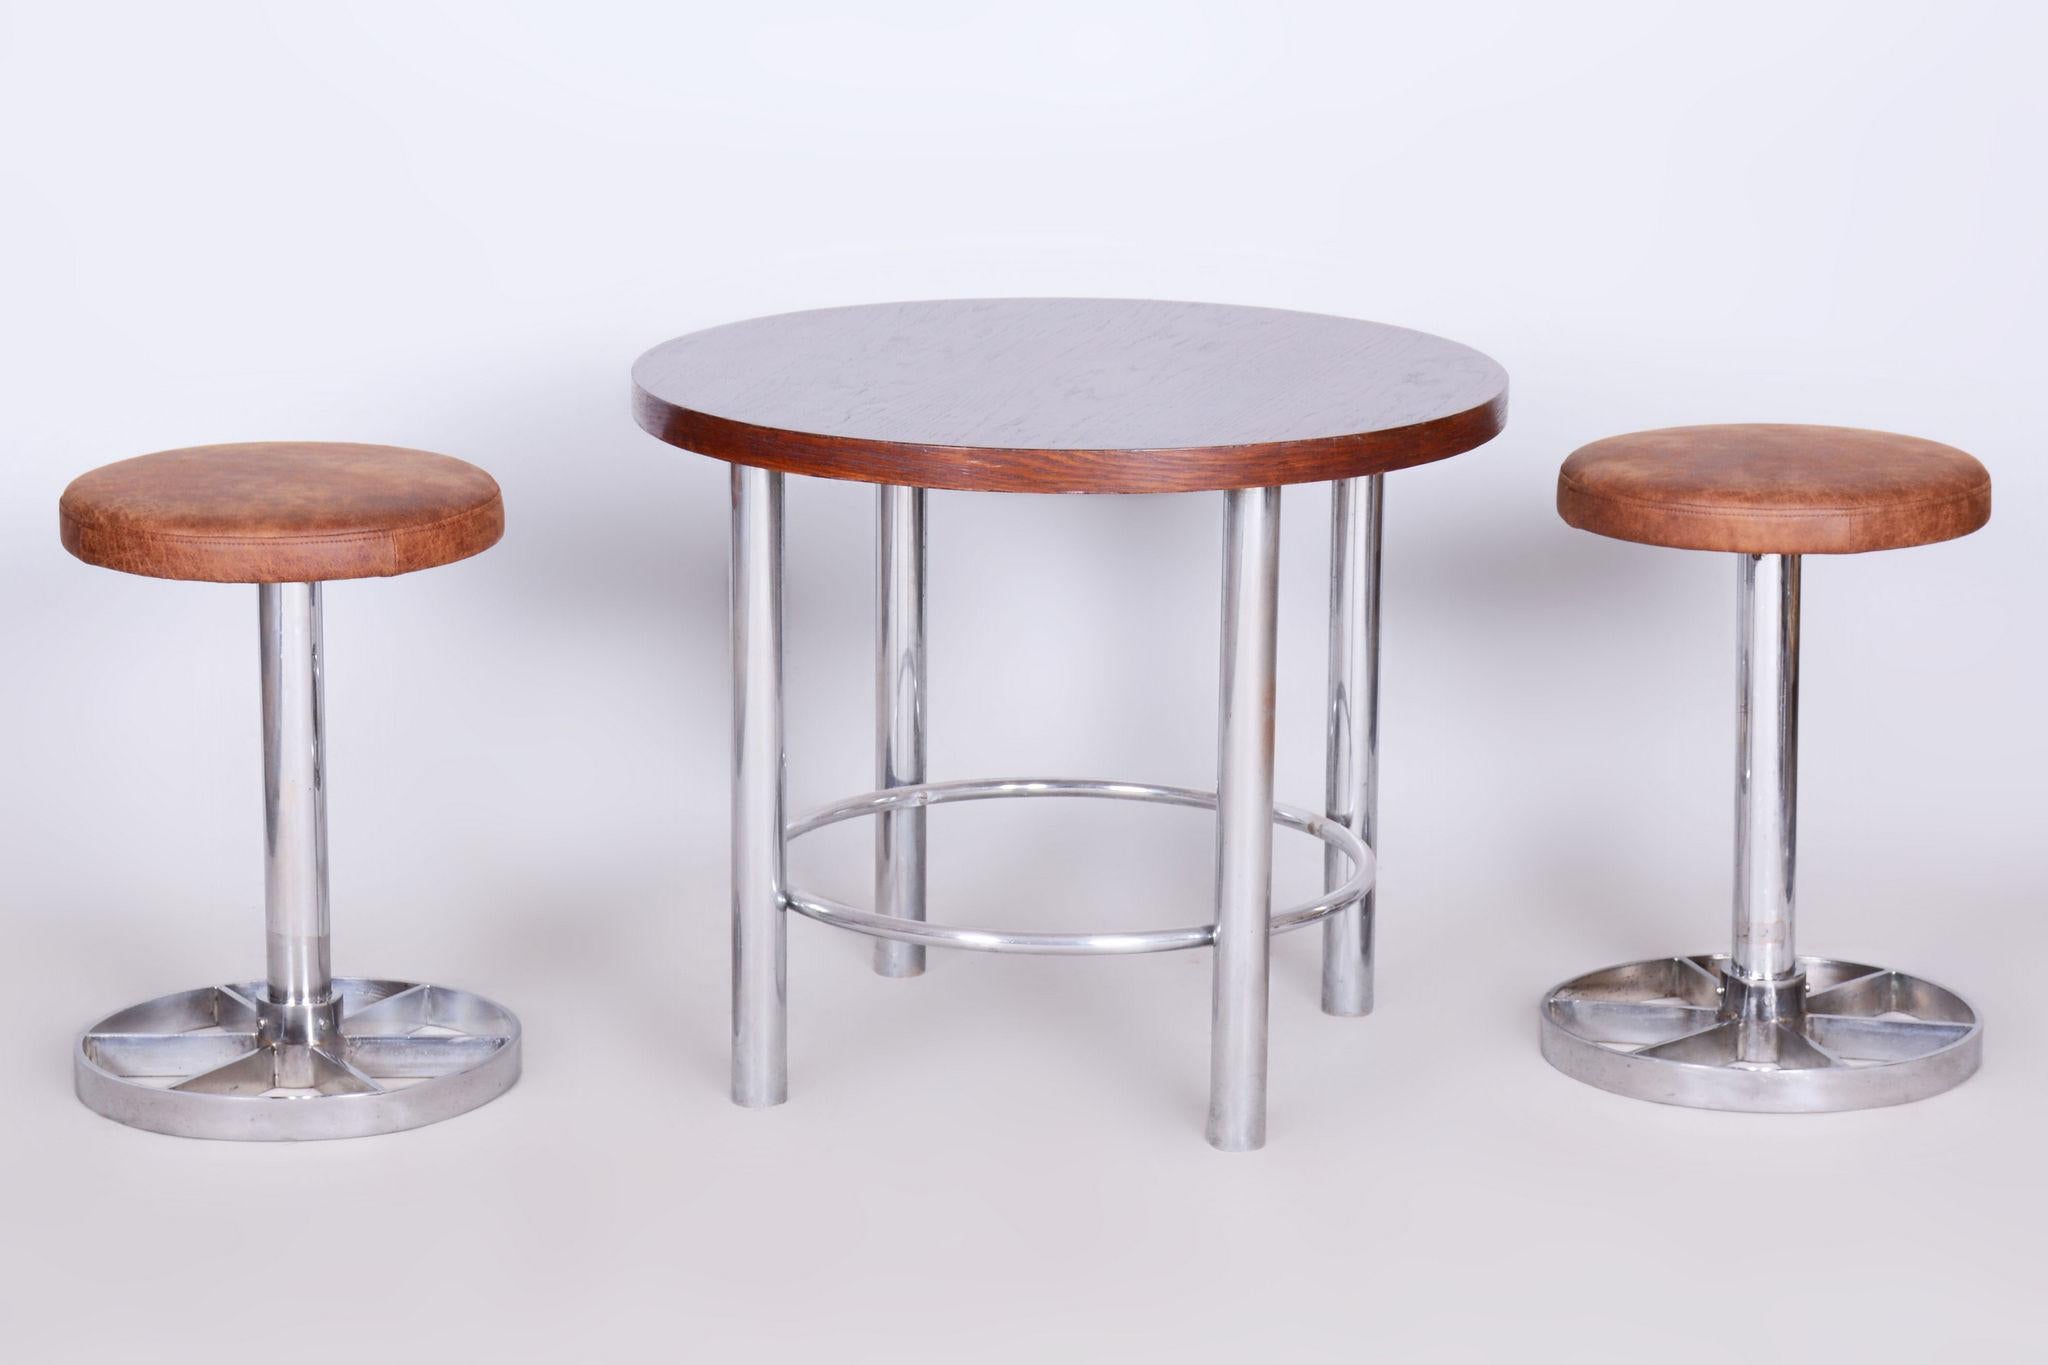 1930-1939
Origin: Czech

Pair of chrome-plated steel stools. 

The new upholstery is high quality leather, it's very easy to clean and retains its colours very well even in direct sunlight. 		

The chrome parts have been cleaned and professionally